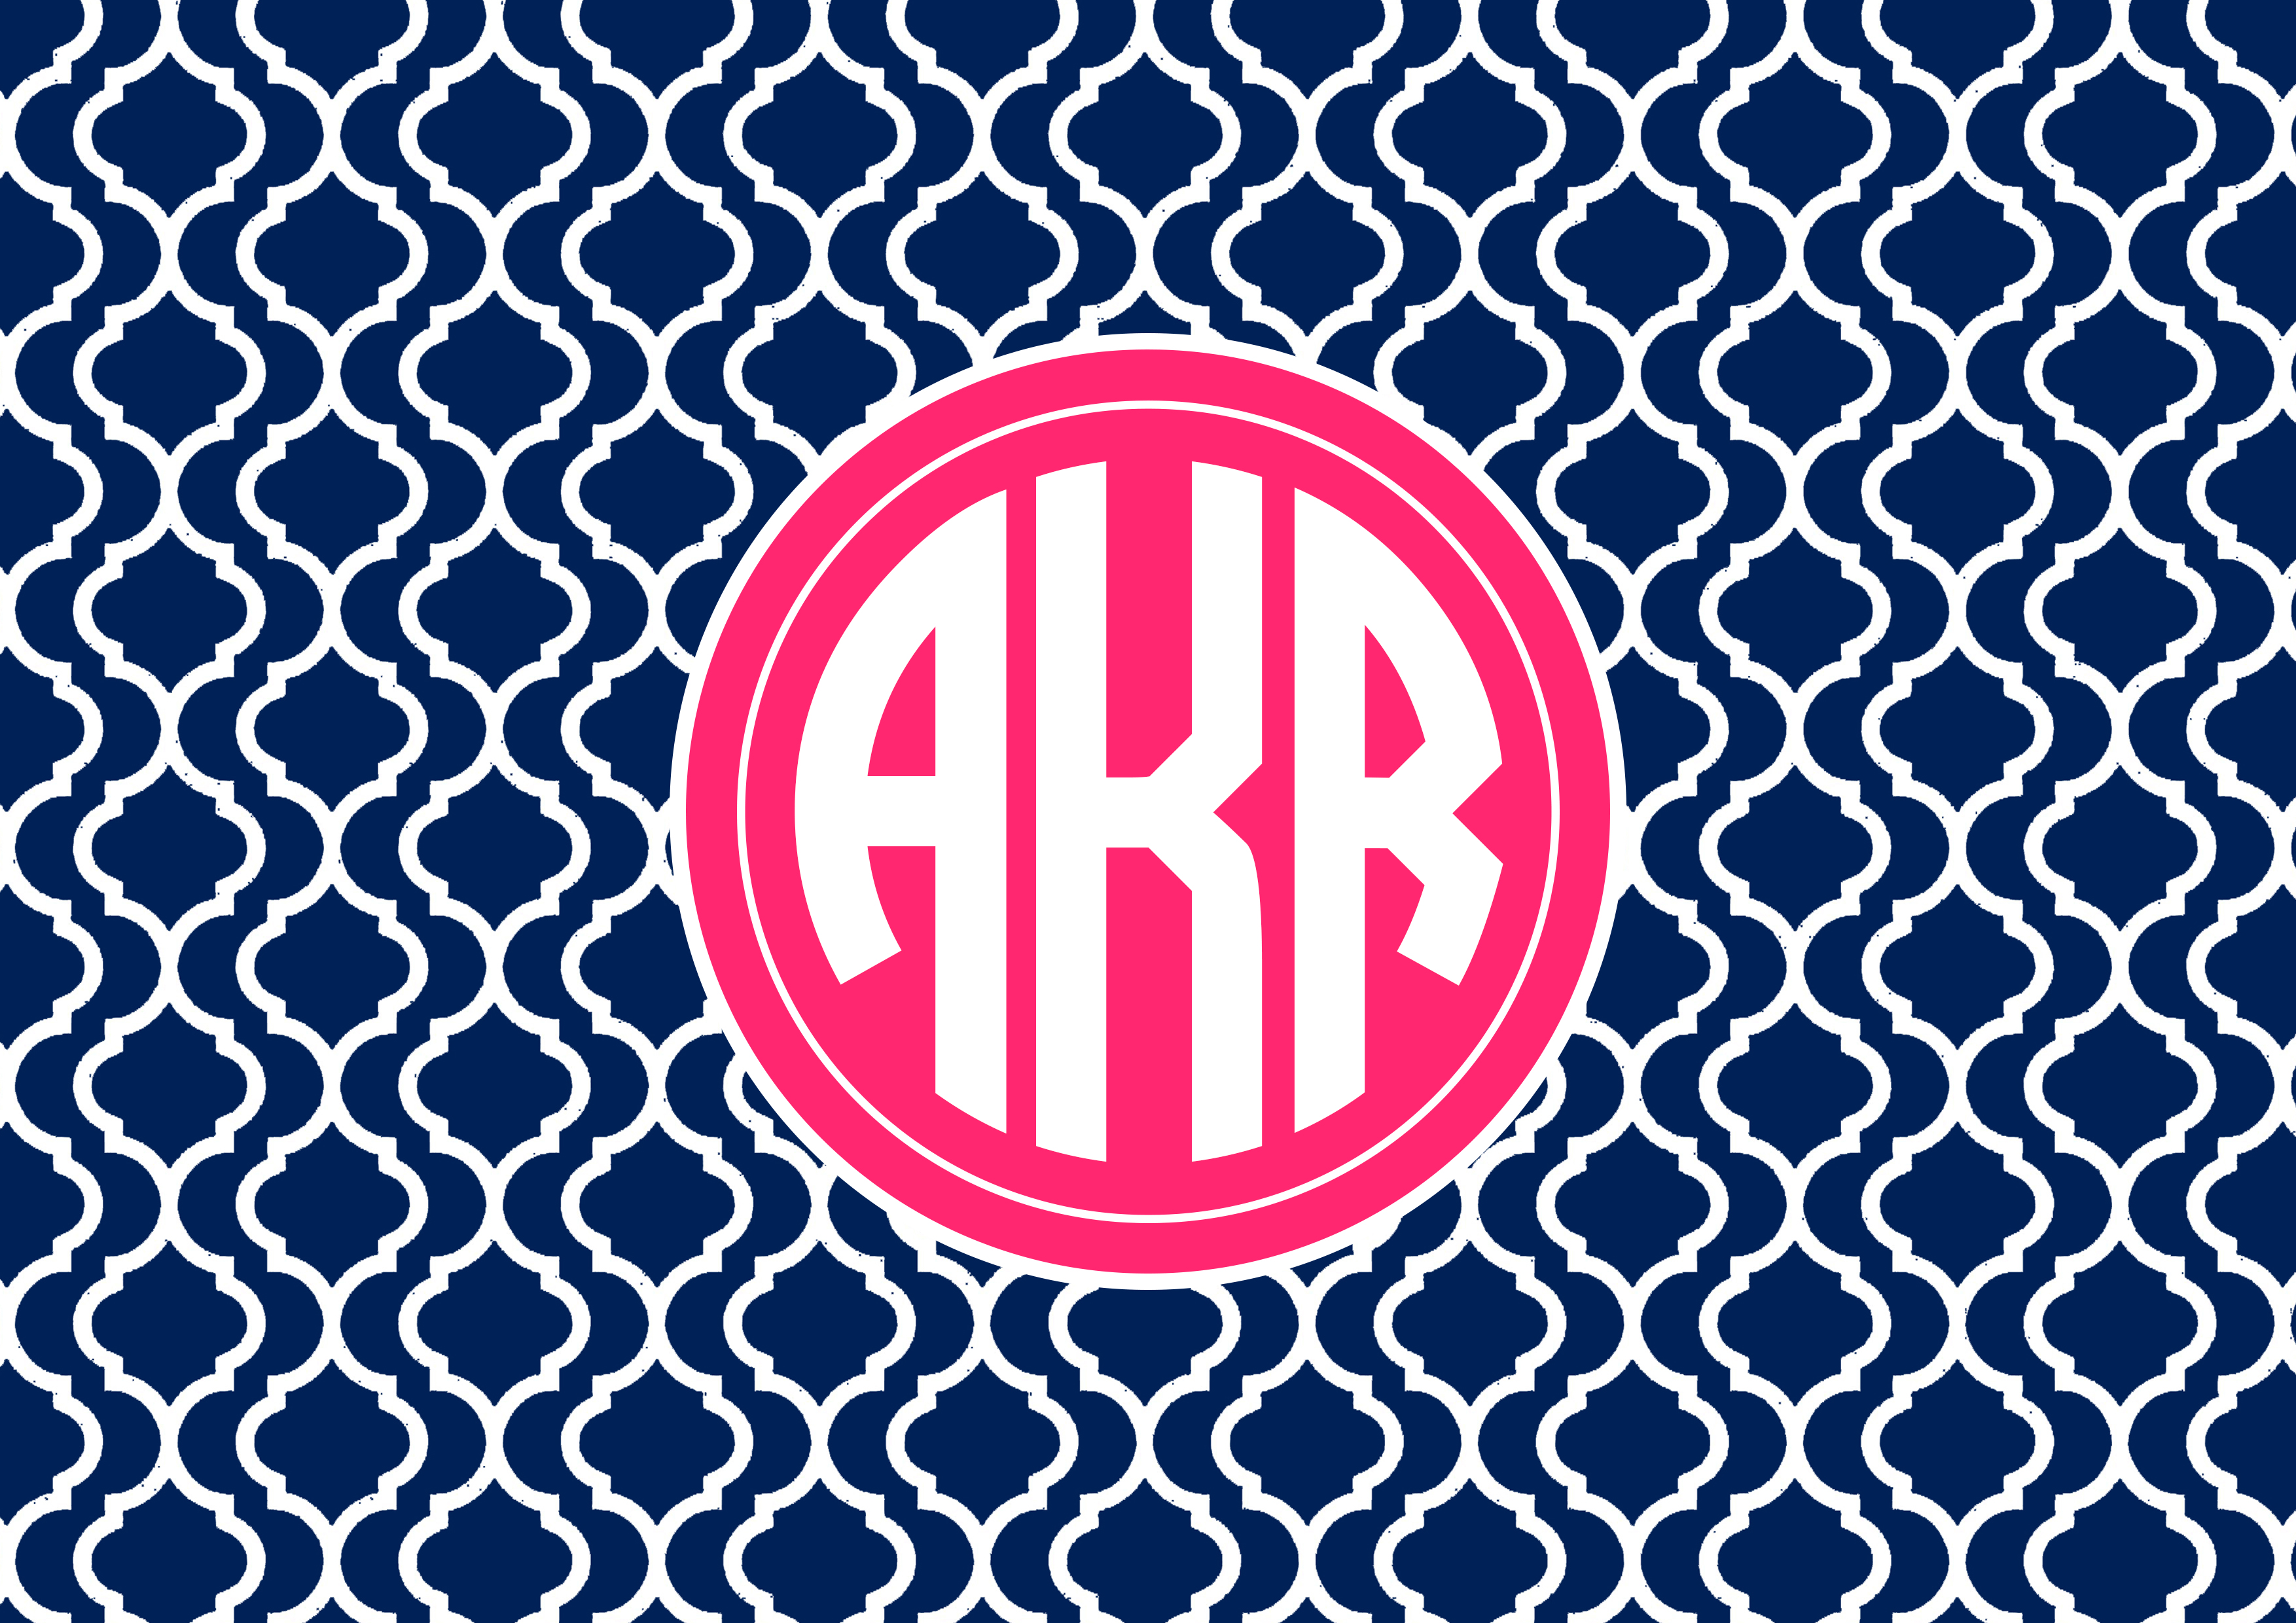 Personalised Monogram Wallpaper Allaboutthehouse Printables HD Wallpapers Download Free Images Wallpaper [wallpaper981.blogspot.com]